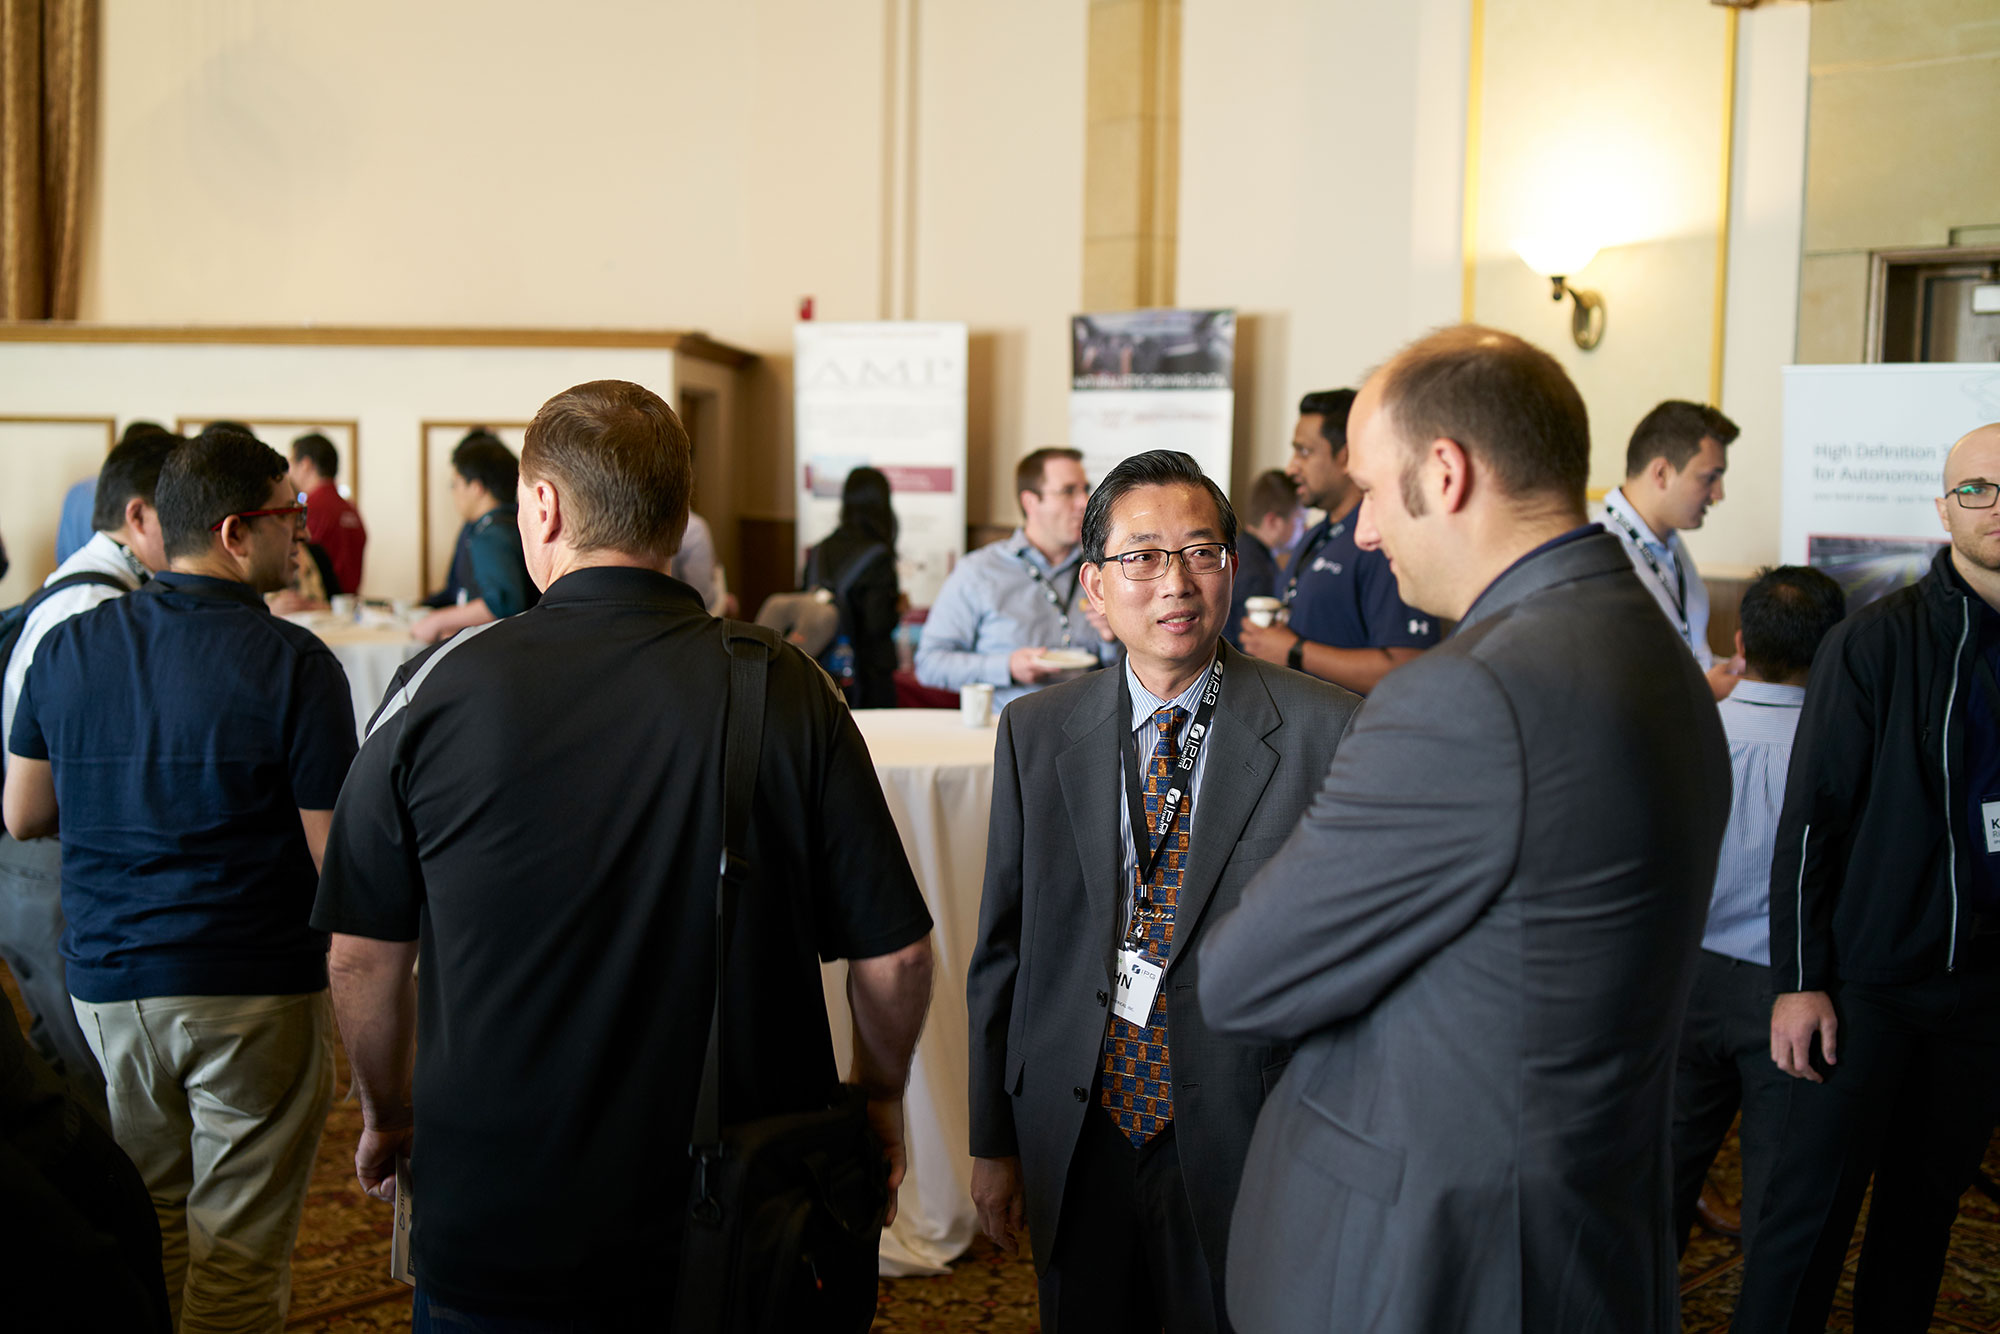 The breaks and the reception at the end of the eventful day offered ample time for networking.